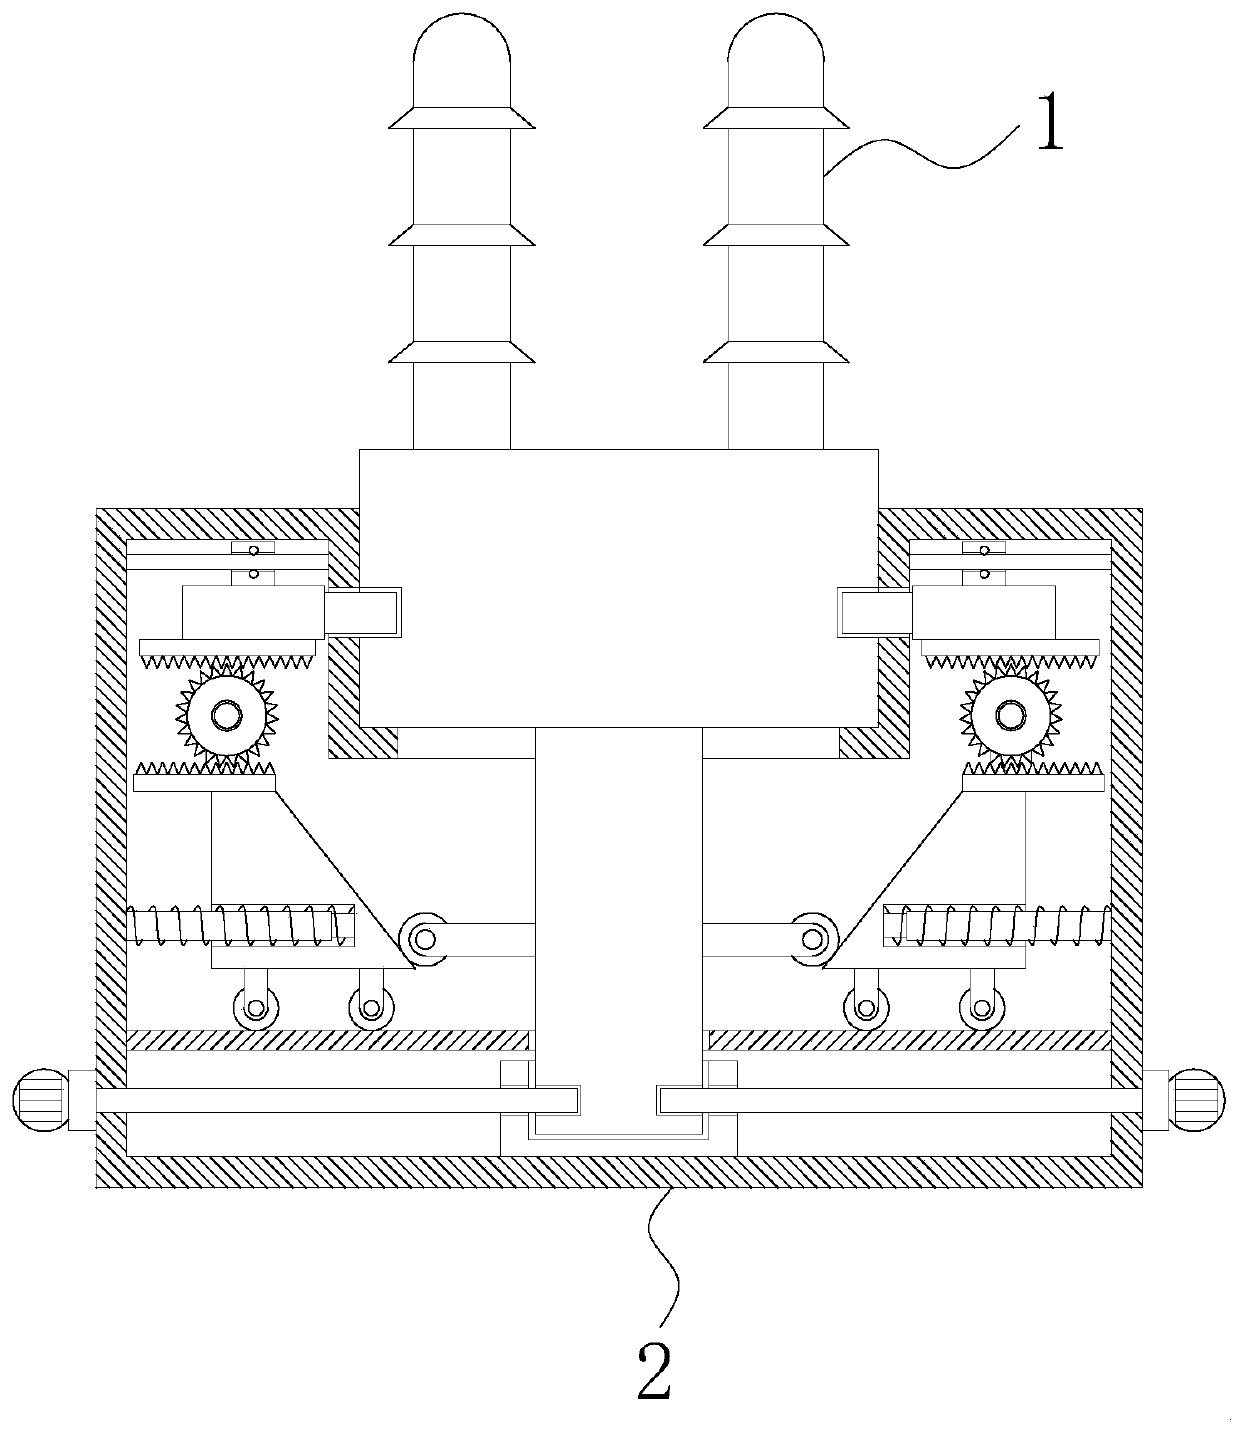 Power transformer with high wire clamping strength